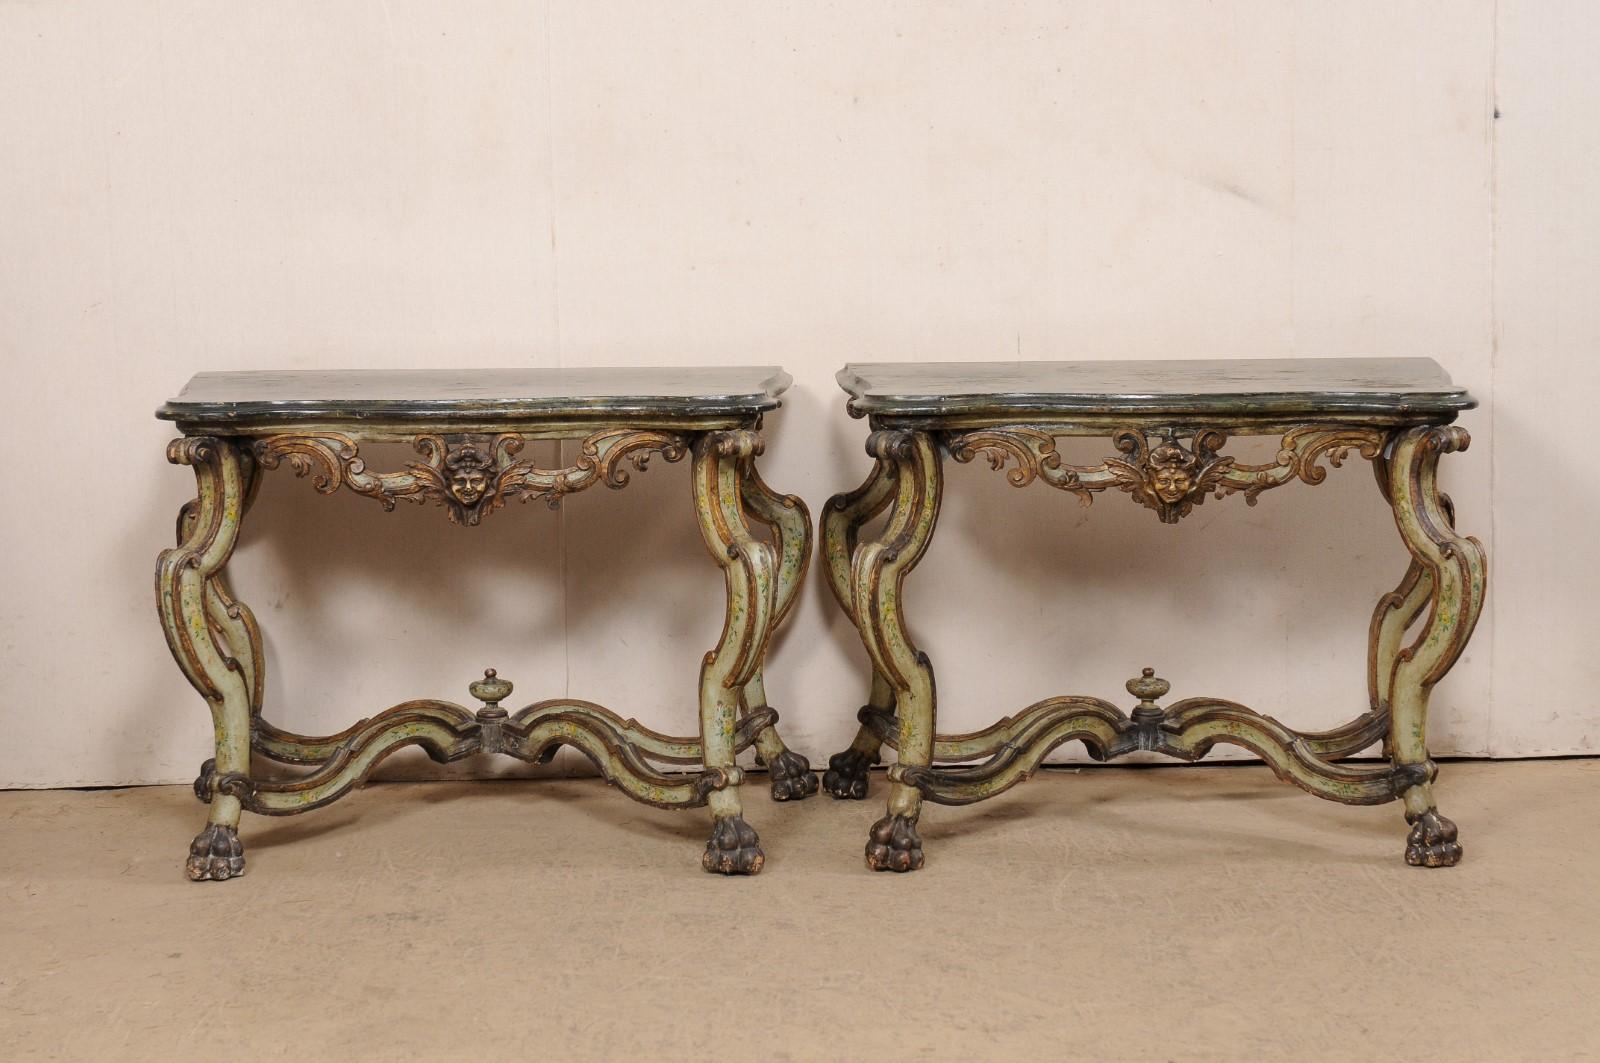 Exquisite Pair of 18th C. Italian Venetian Carved & Painted Wood Console Tables For Sale 8